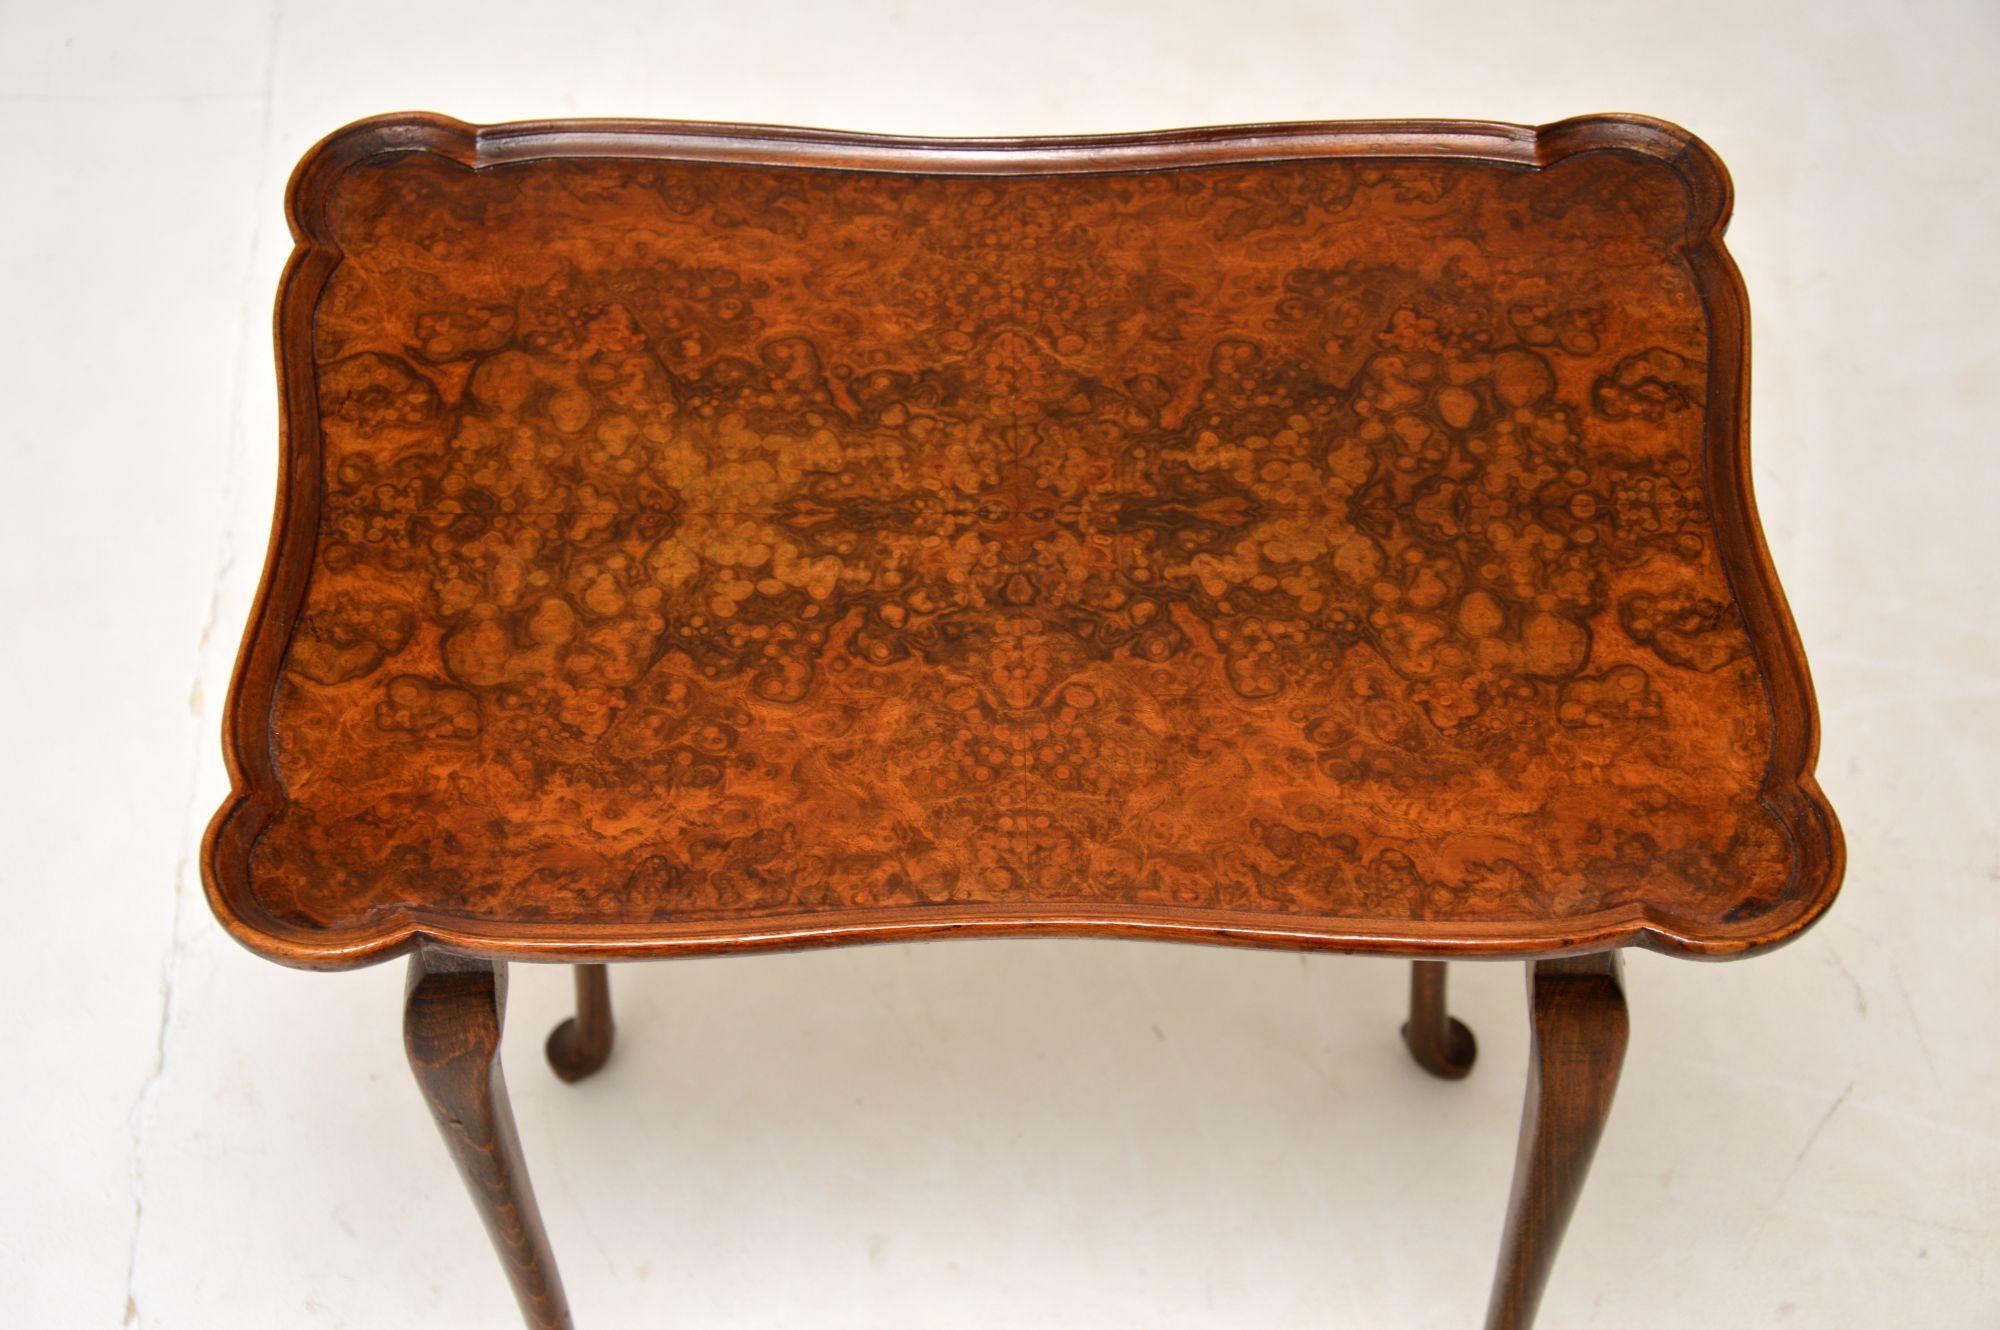 Early 20th Century Antique Burr Walnut Pie Crust Nest of Tables